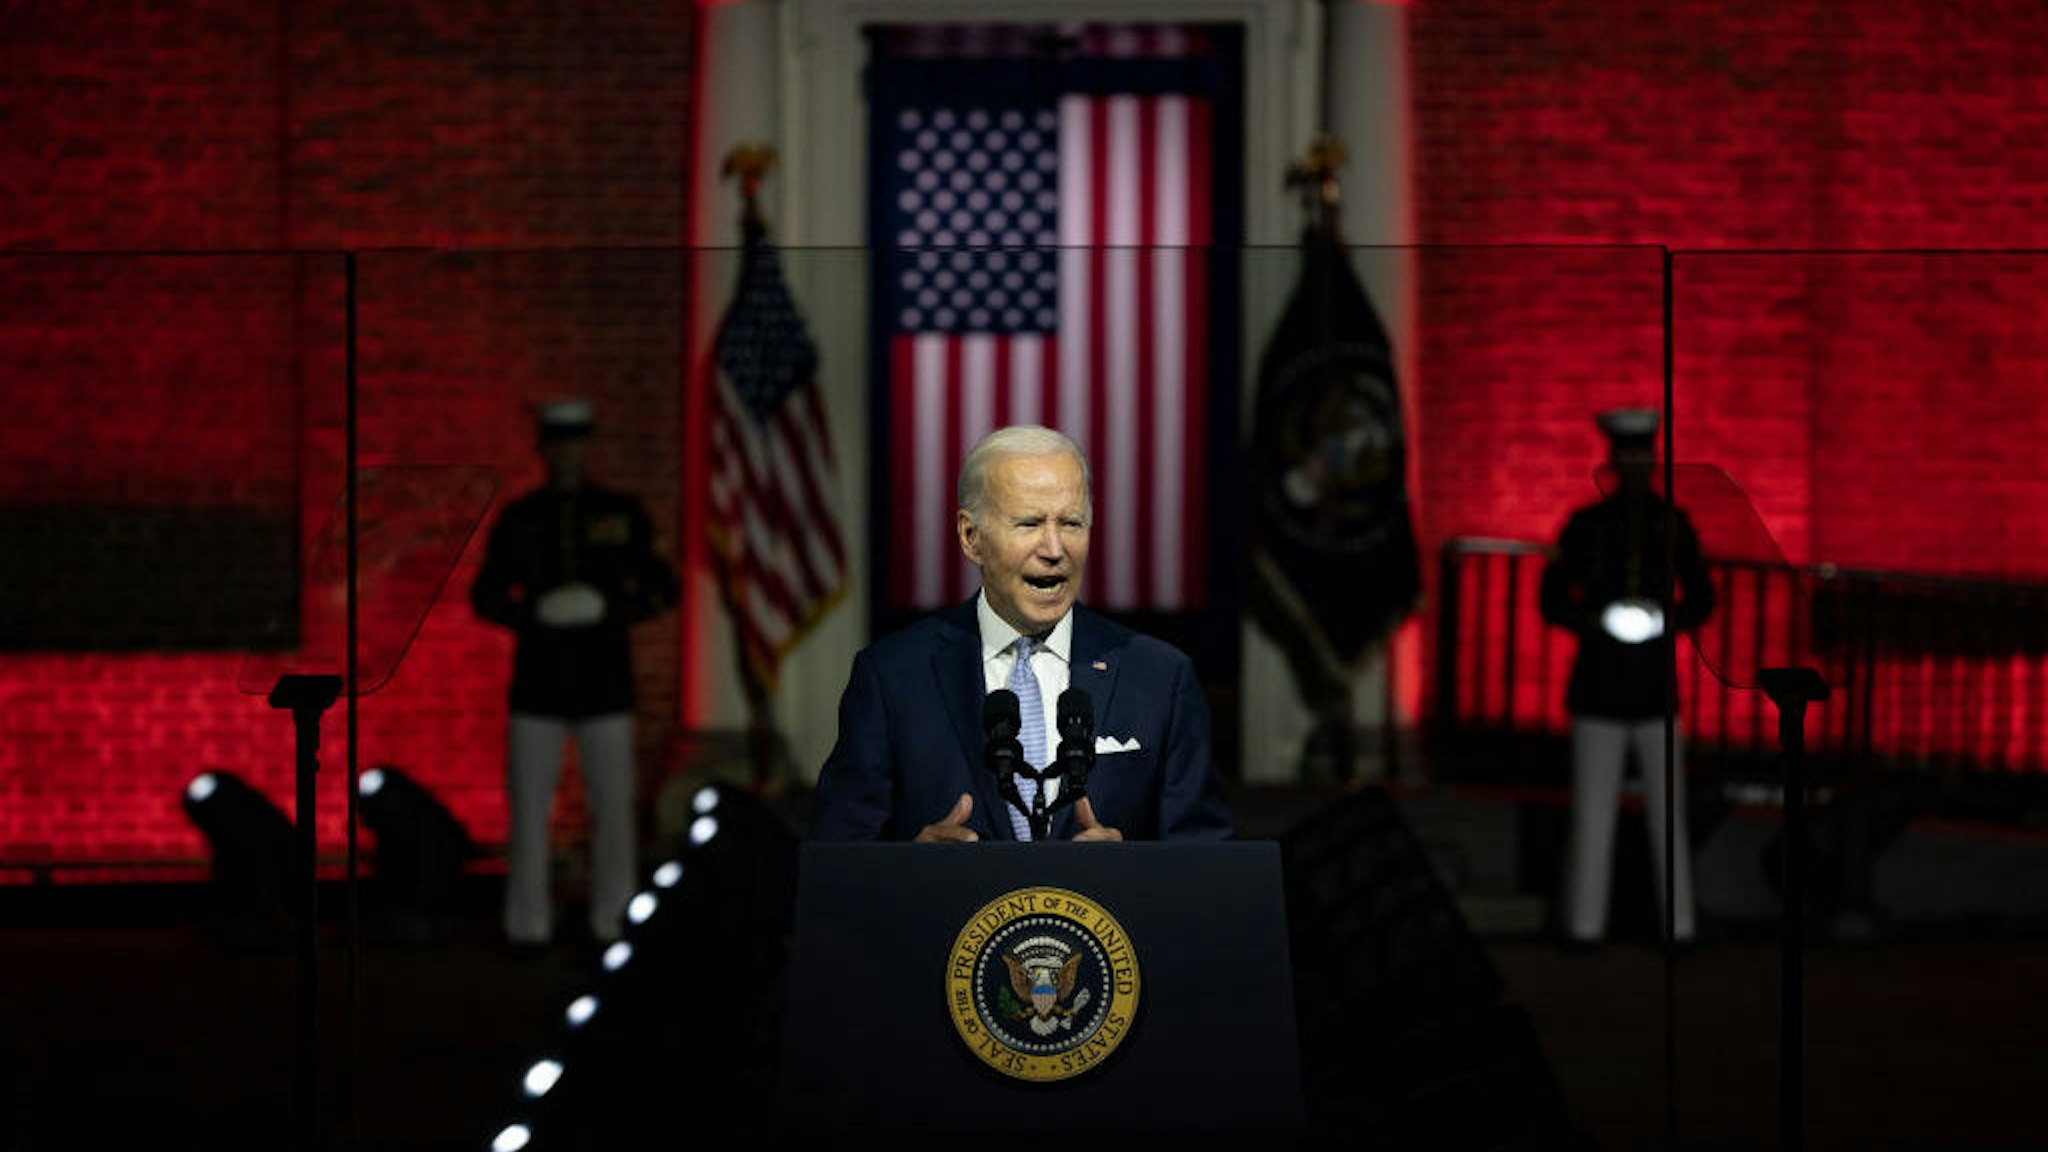 US President Joe Biden speaks at Independence National Historical Park in Philadelphia, Pennsylvania, US, on Thursday, Sept. 1, 2022. Biden is arguing that Donald Trump's supporters pose a threat to US democracy and the country's elections during an address billed as the "battle for the soul of the nation." Photographer: Hannah Beier/Bloomberg